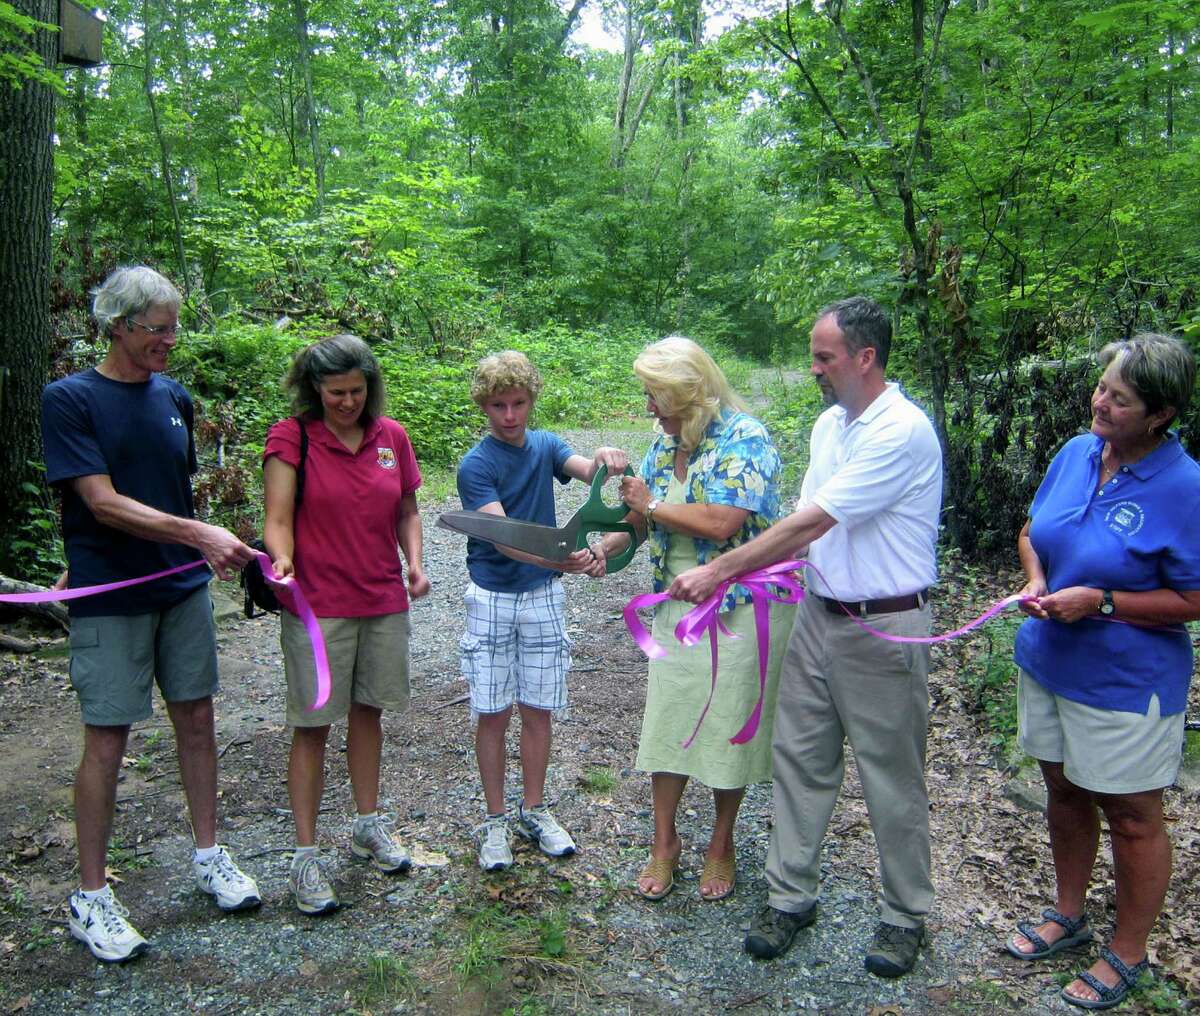 Mayor Pat Murphy and Jake O'Brien do the honors Aug. 14 at an official ribbon-cutting to celebrate the Sega Meadows Park bike trail in New Milford. Enjoying the moment are, from left to riight, Jake's father, bicycling advocate Tom O'Brien, Molly Sperduto of the United States Fish and Wildlife Service, and, right, New Milford Parks & Recreation director Dan Calhoun and assistant director Eleanor Covelli.